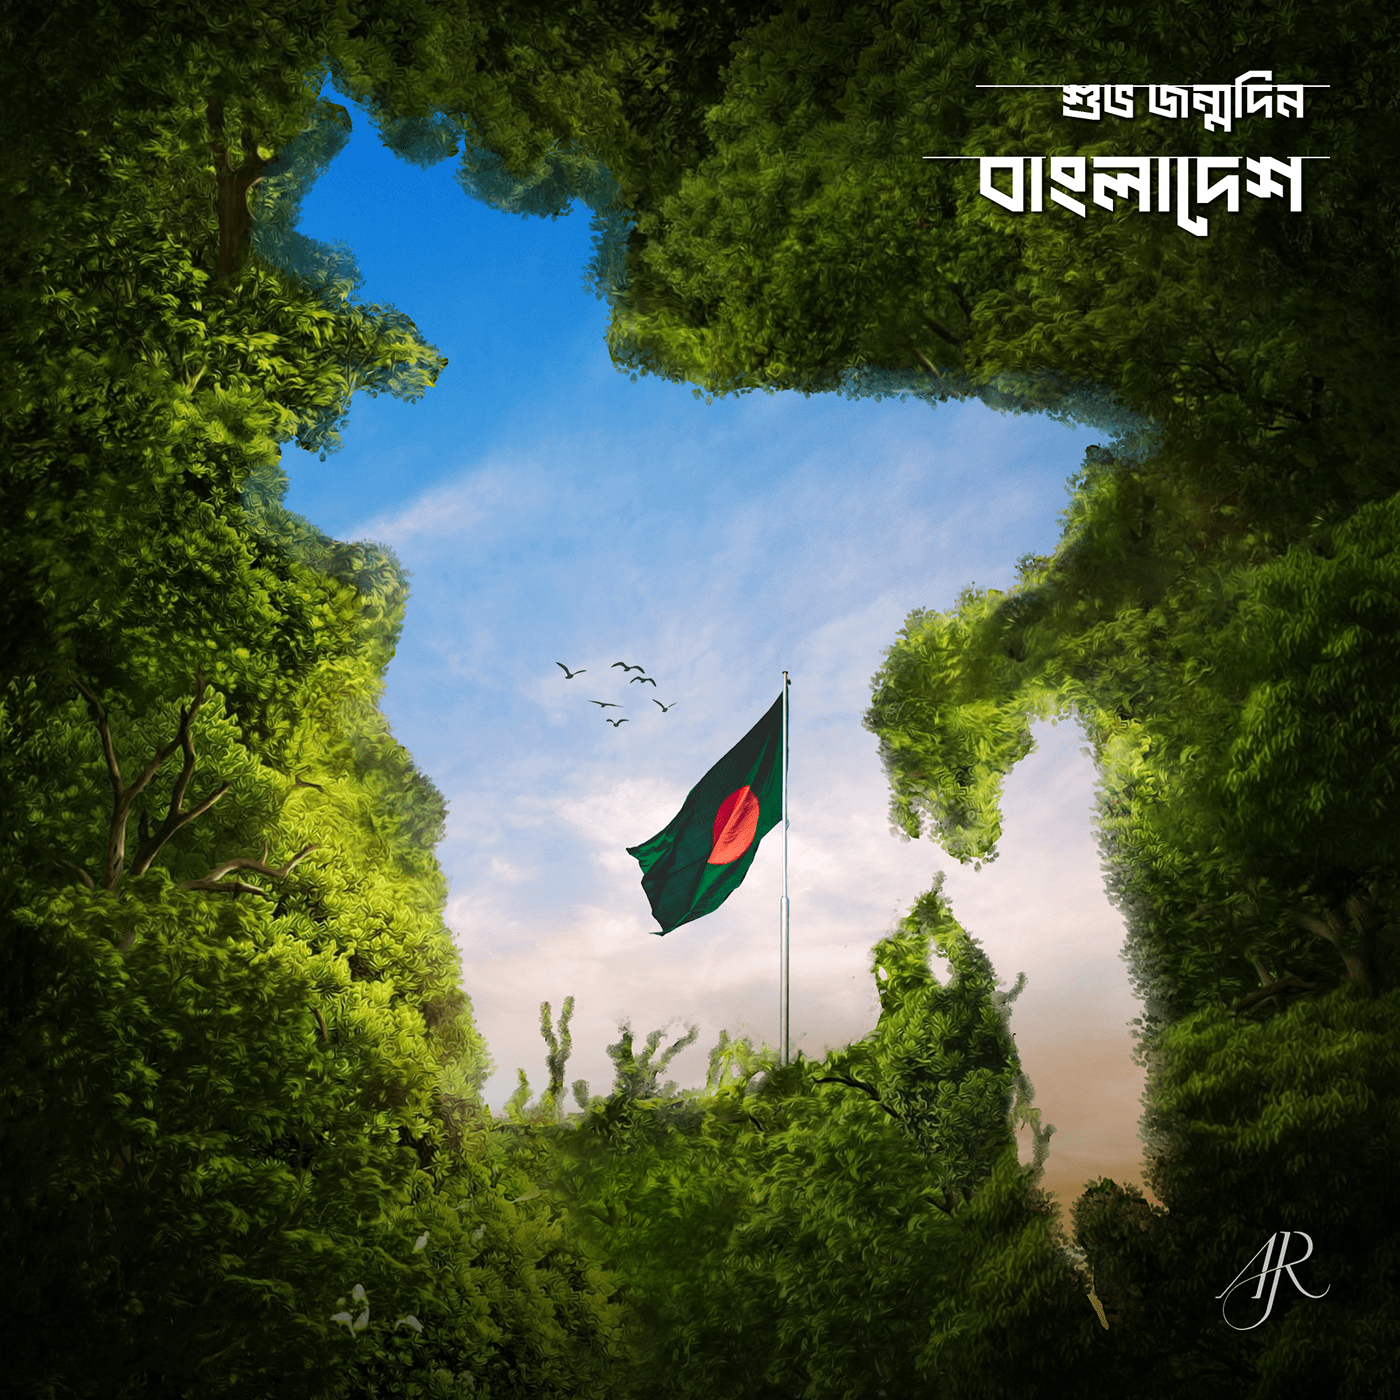 26 MARCH 26 March independence day ২৬ মার্চ স্বাধীনতা দিবস 26th march Anup Roy Bangladesh independence day Shadhinota Dibosh মহান স্বাধীনতা দিবস স্বাধীনতা দিবস